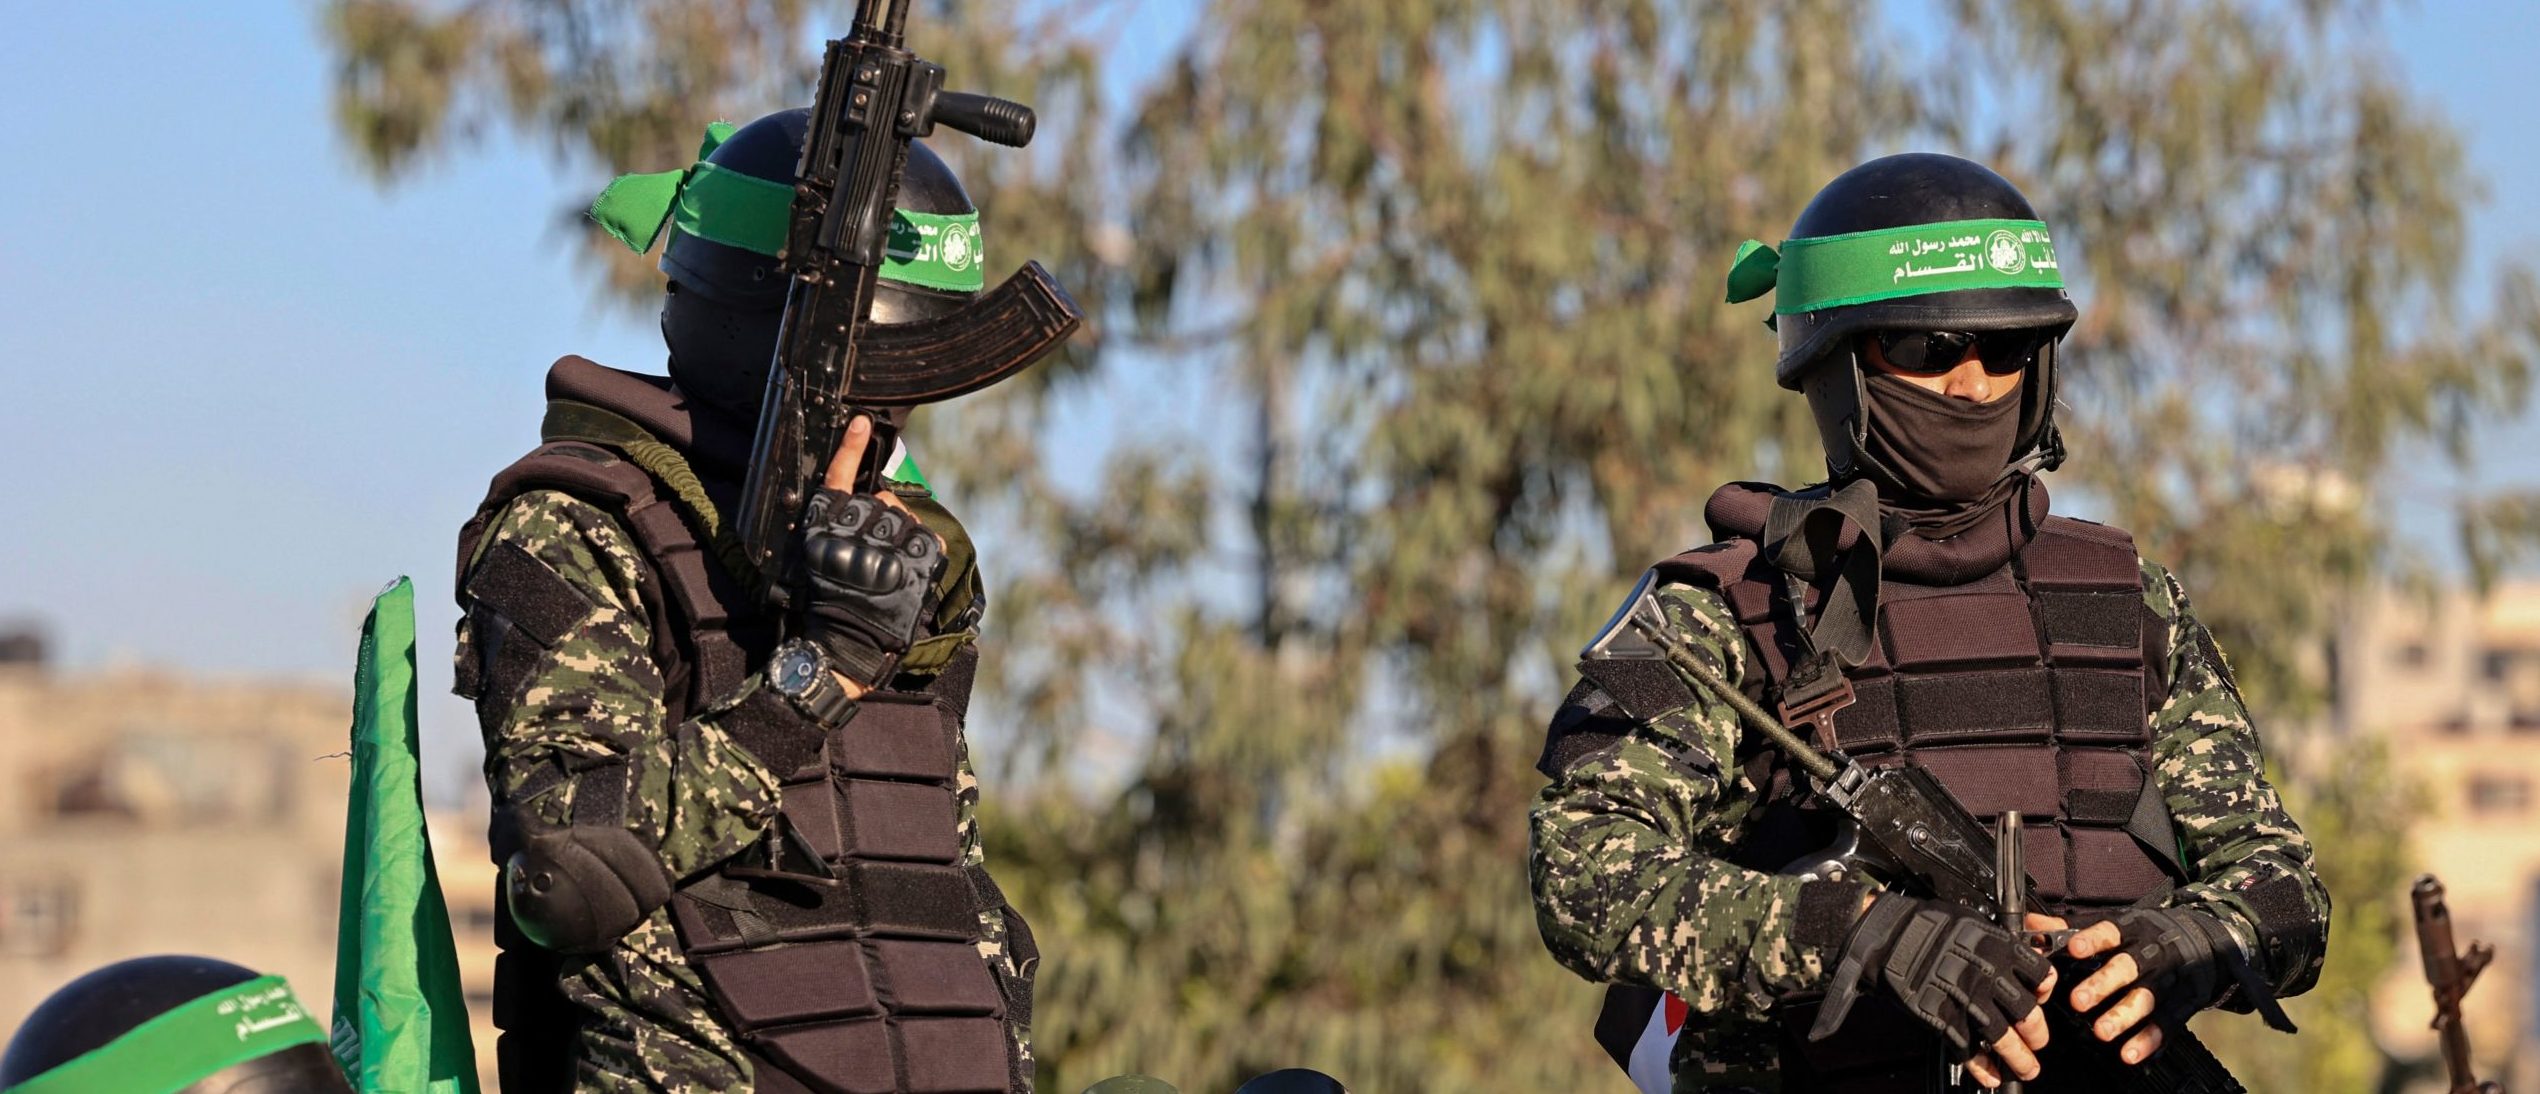 Members of the Ezzedine al-Qassam Brigades, armed wing of the Palestinian Hamas movement, parade in Gaza City on june 7, 2021. (Photo by MOHAMMED ABED / AFP) (Photo by MOHAMMED ABED/AFP via Getty Images)